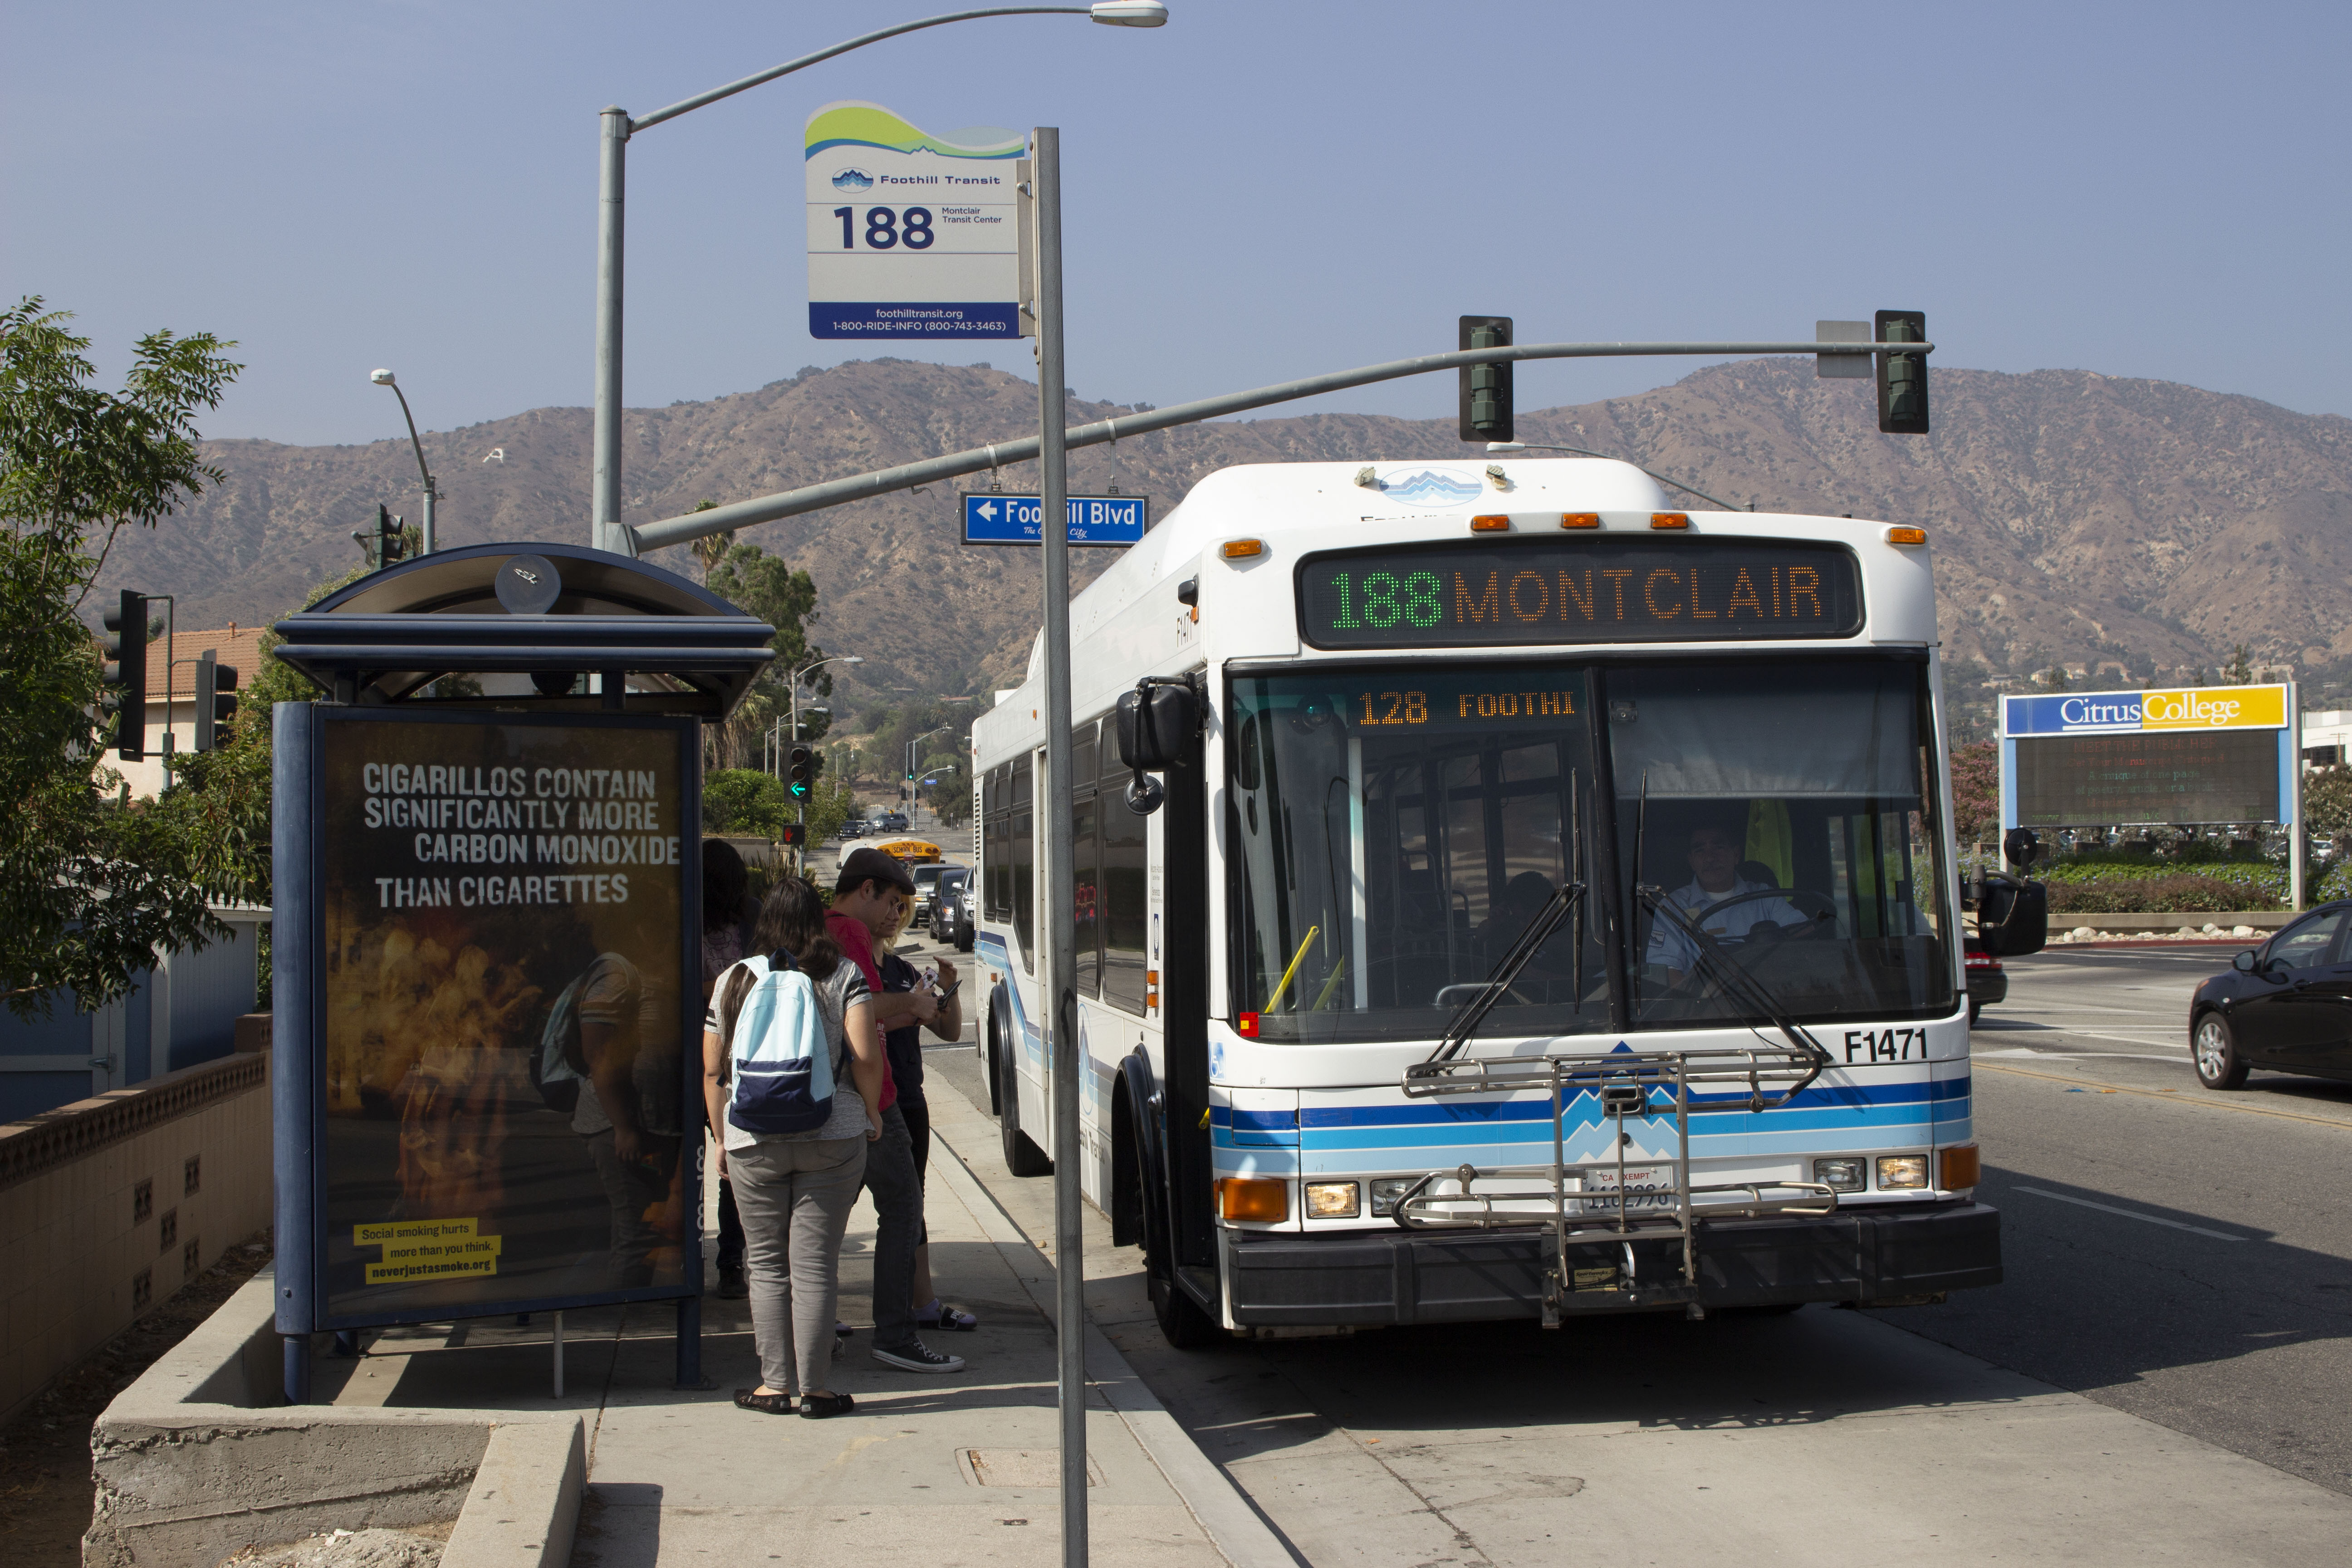 Don’t pass up Class Pass: Public transit fares included in registration fees